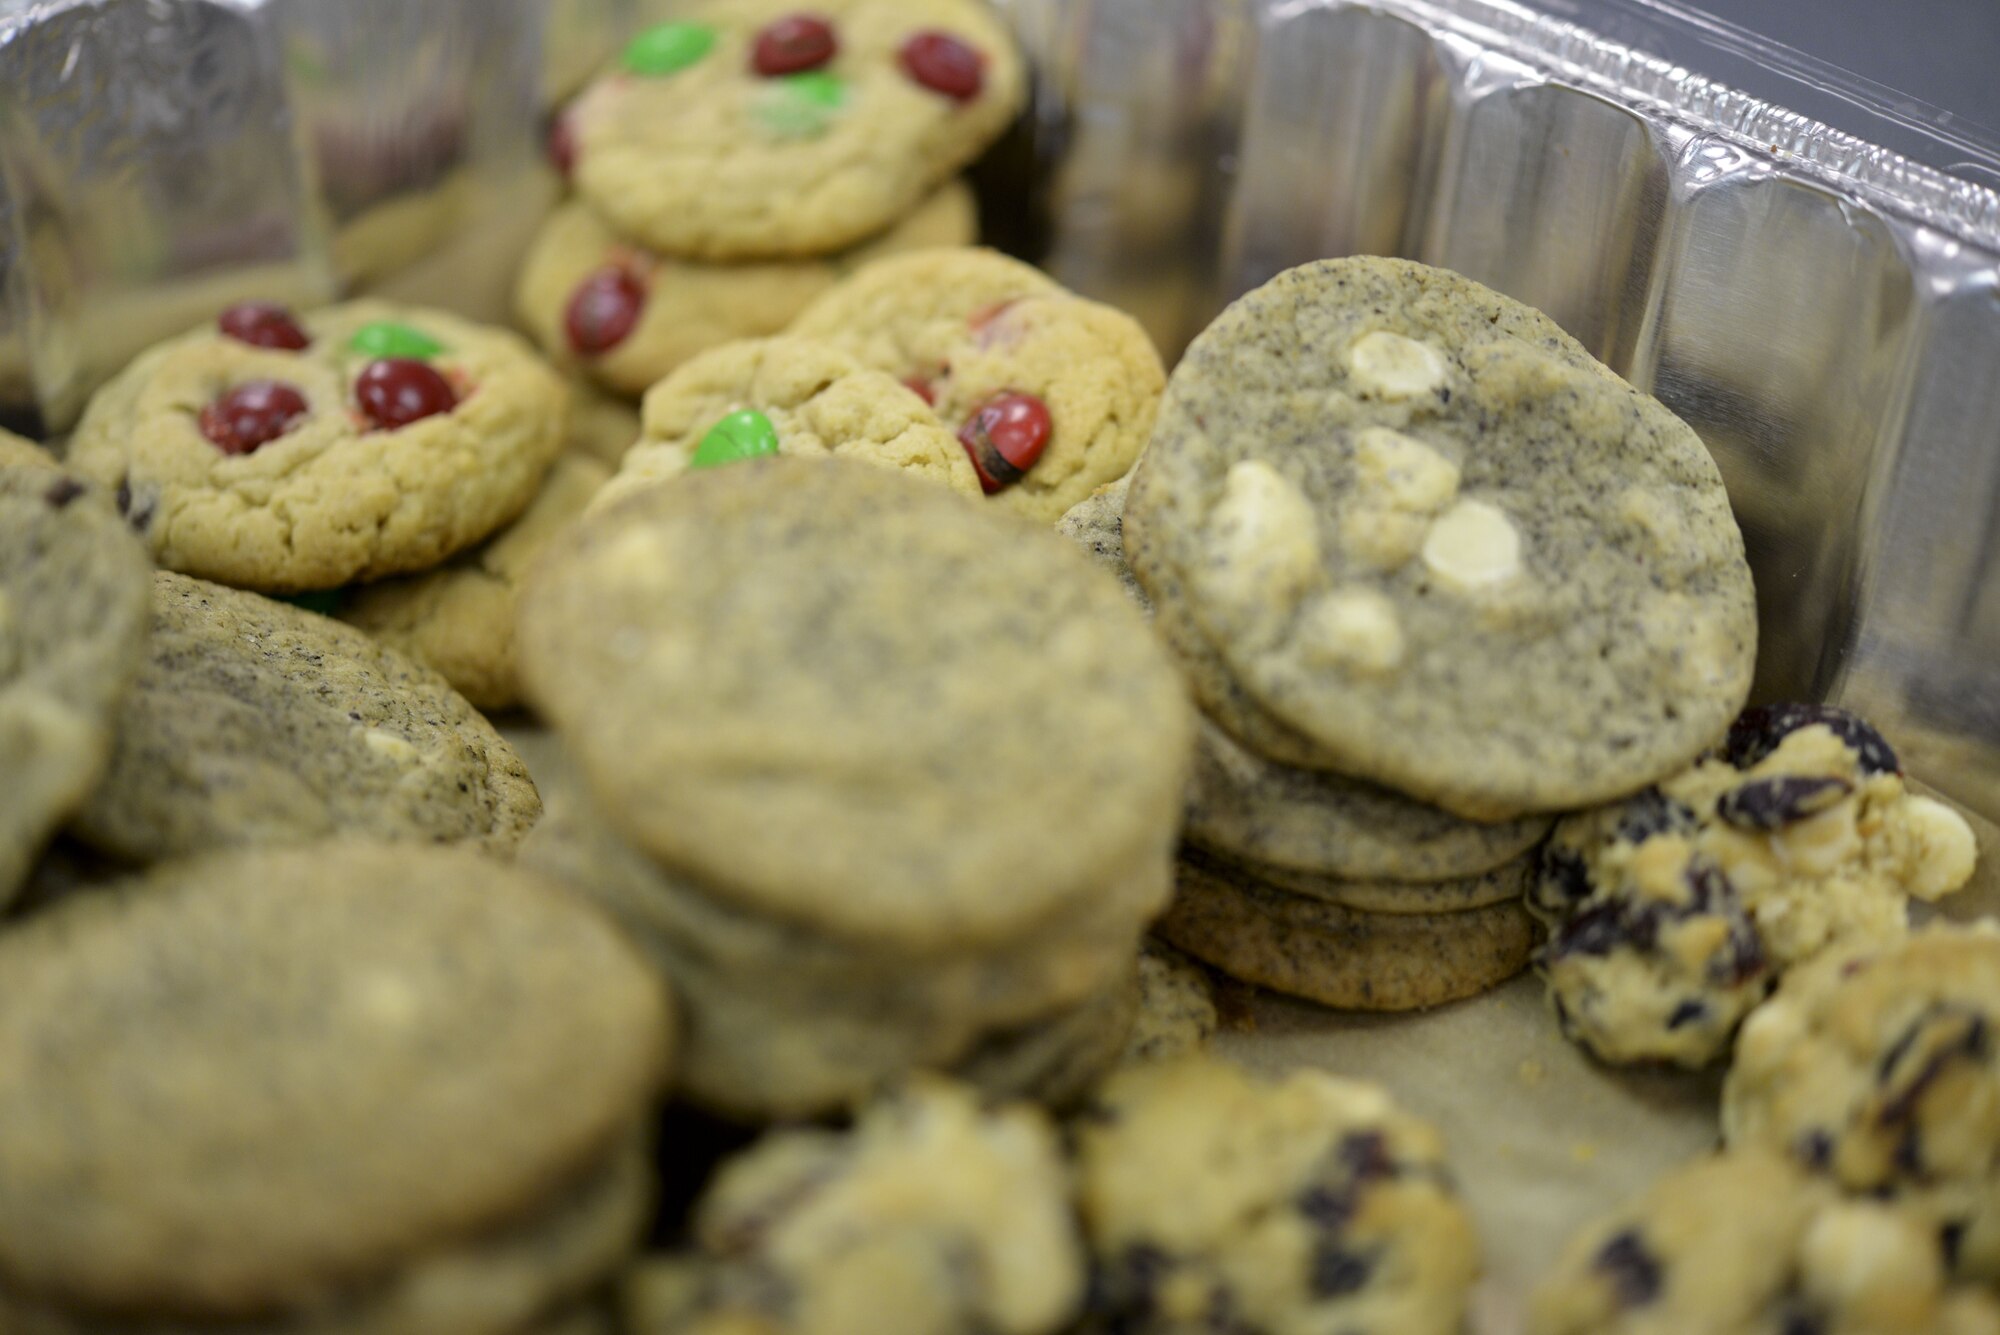 Team Dover leadership packaged a variety of donated cookies to distribute to dorm Airmen Dec. 18, 2017, during Operation Cookie Drop at the 9th Airlift Squadron on Dover Air Force Base, Del. The Dover Chiefs’ Group has organized this holiday event annually for the last fifteen years. (U.S. Air Force photo by Staff Sgt. Aaron J. Jenne)